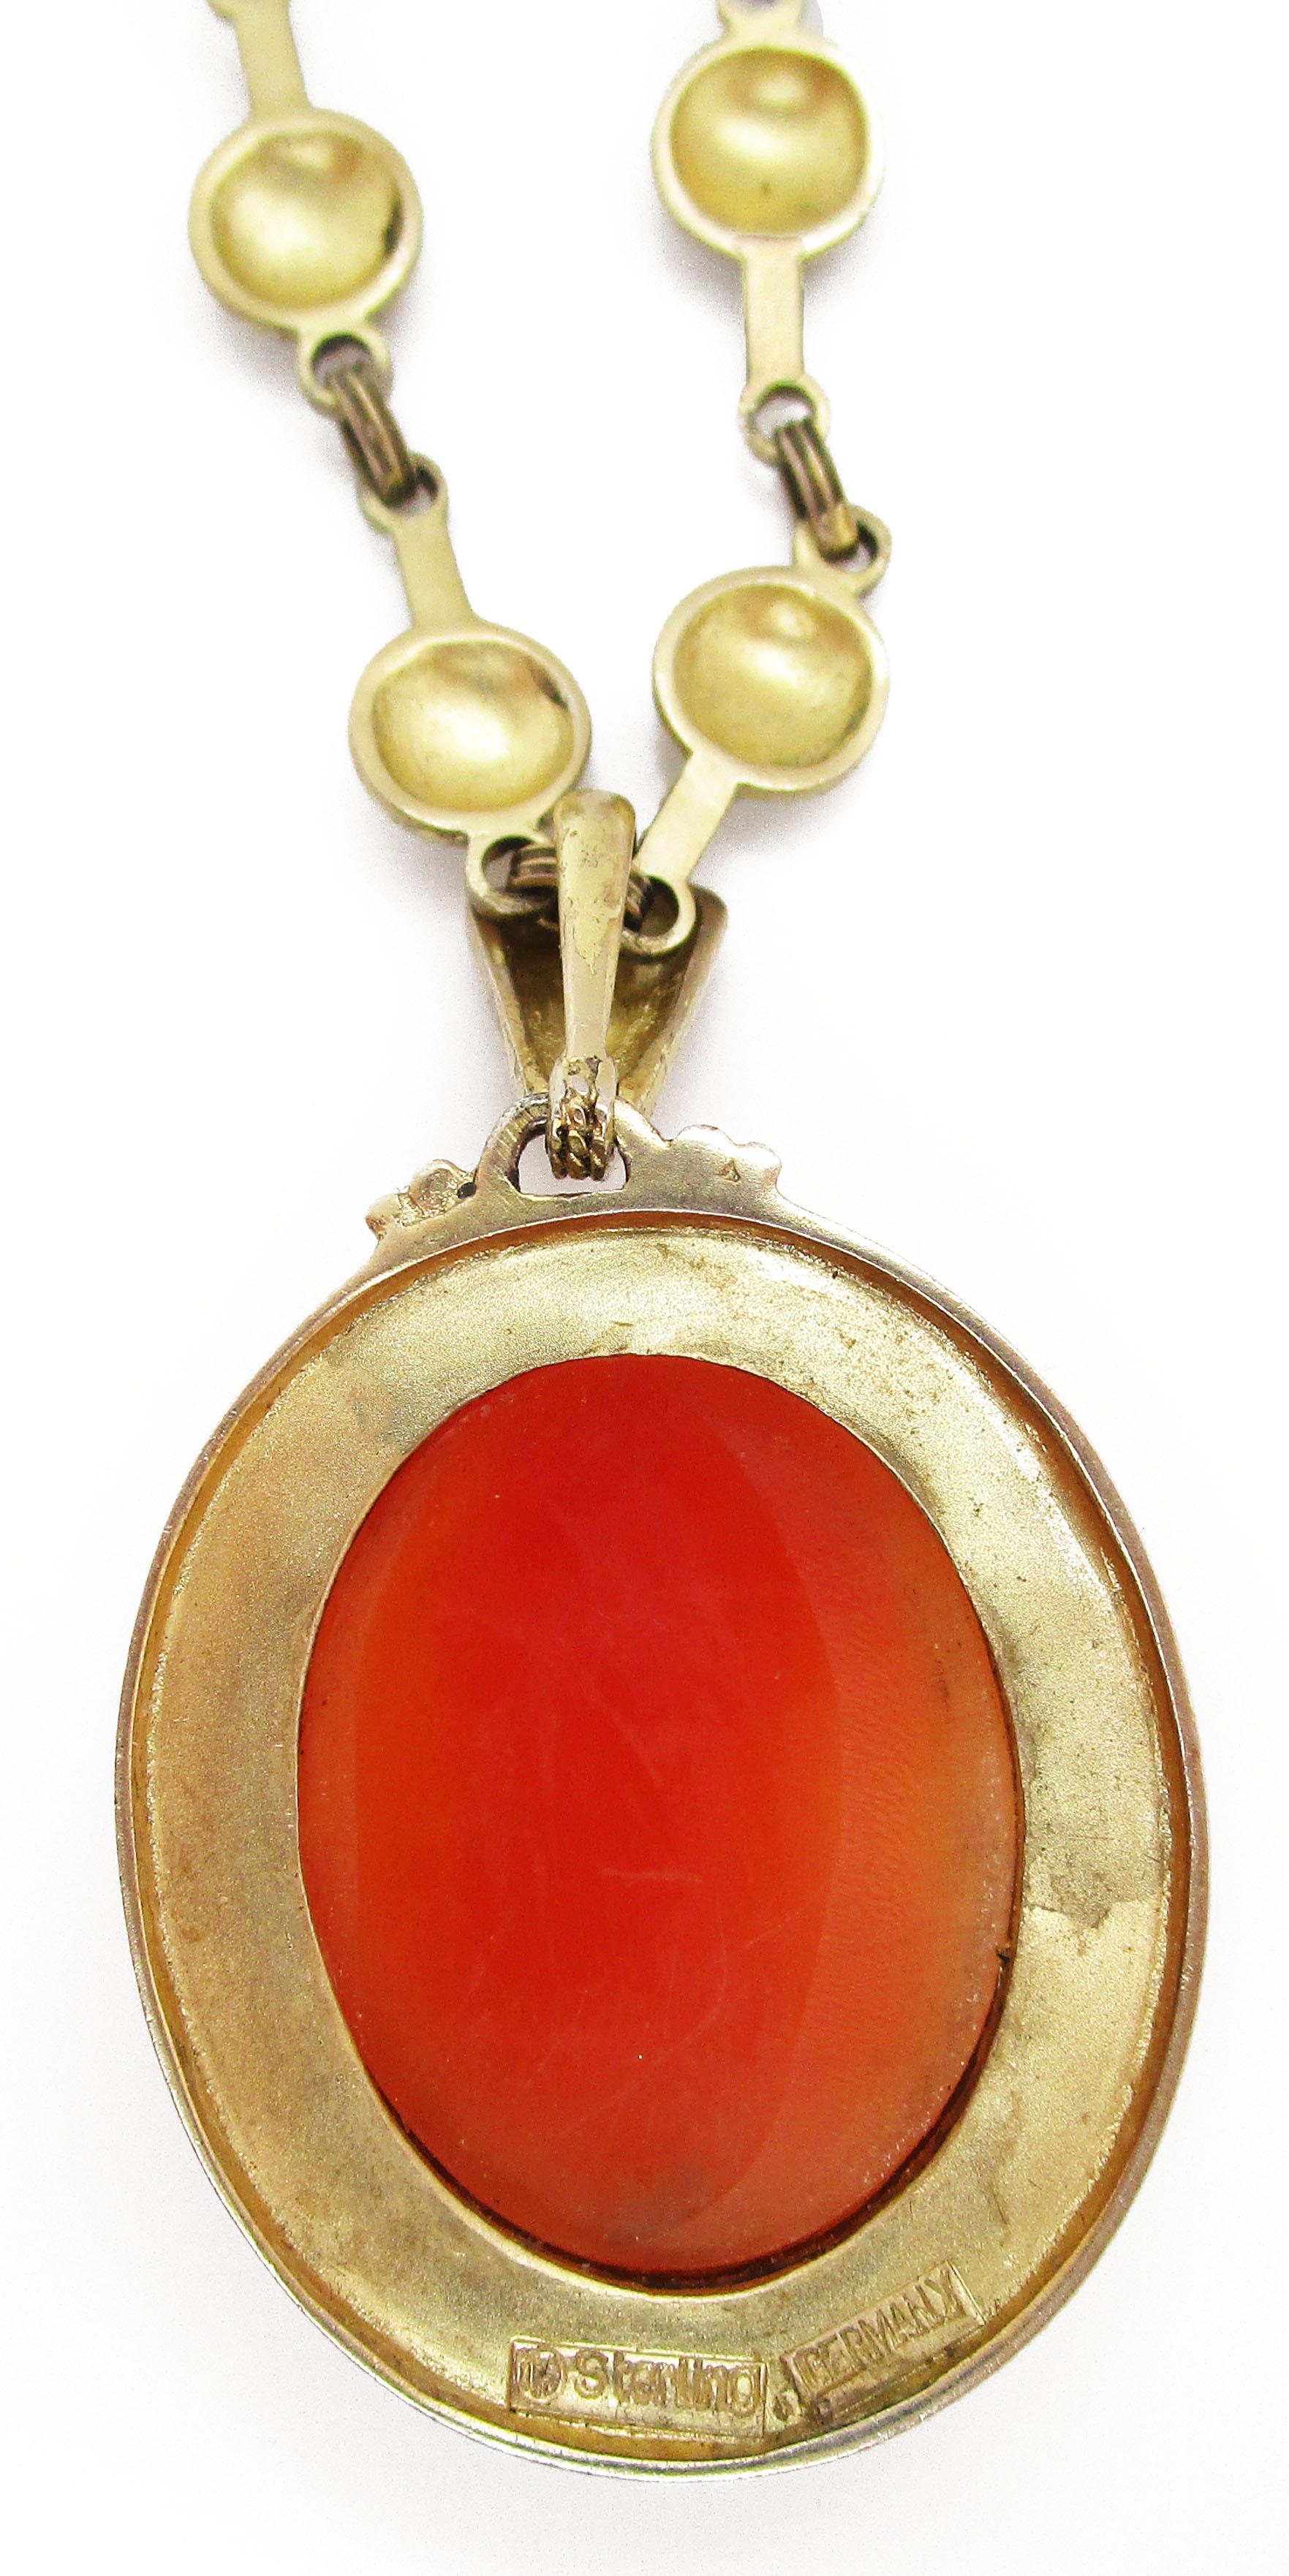 1880 Etruscan Vermeil Theodor Fahrner Shell Cameo Necklace For Sale 4